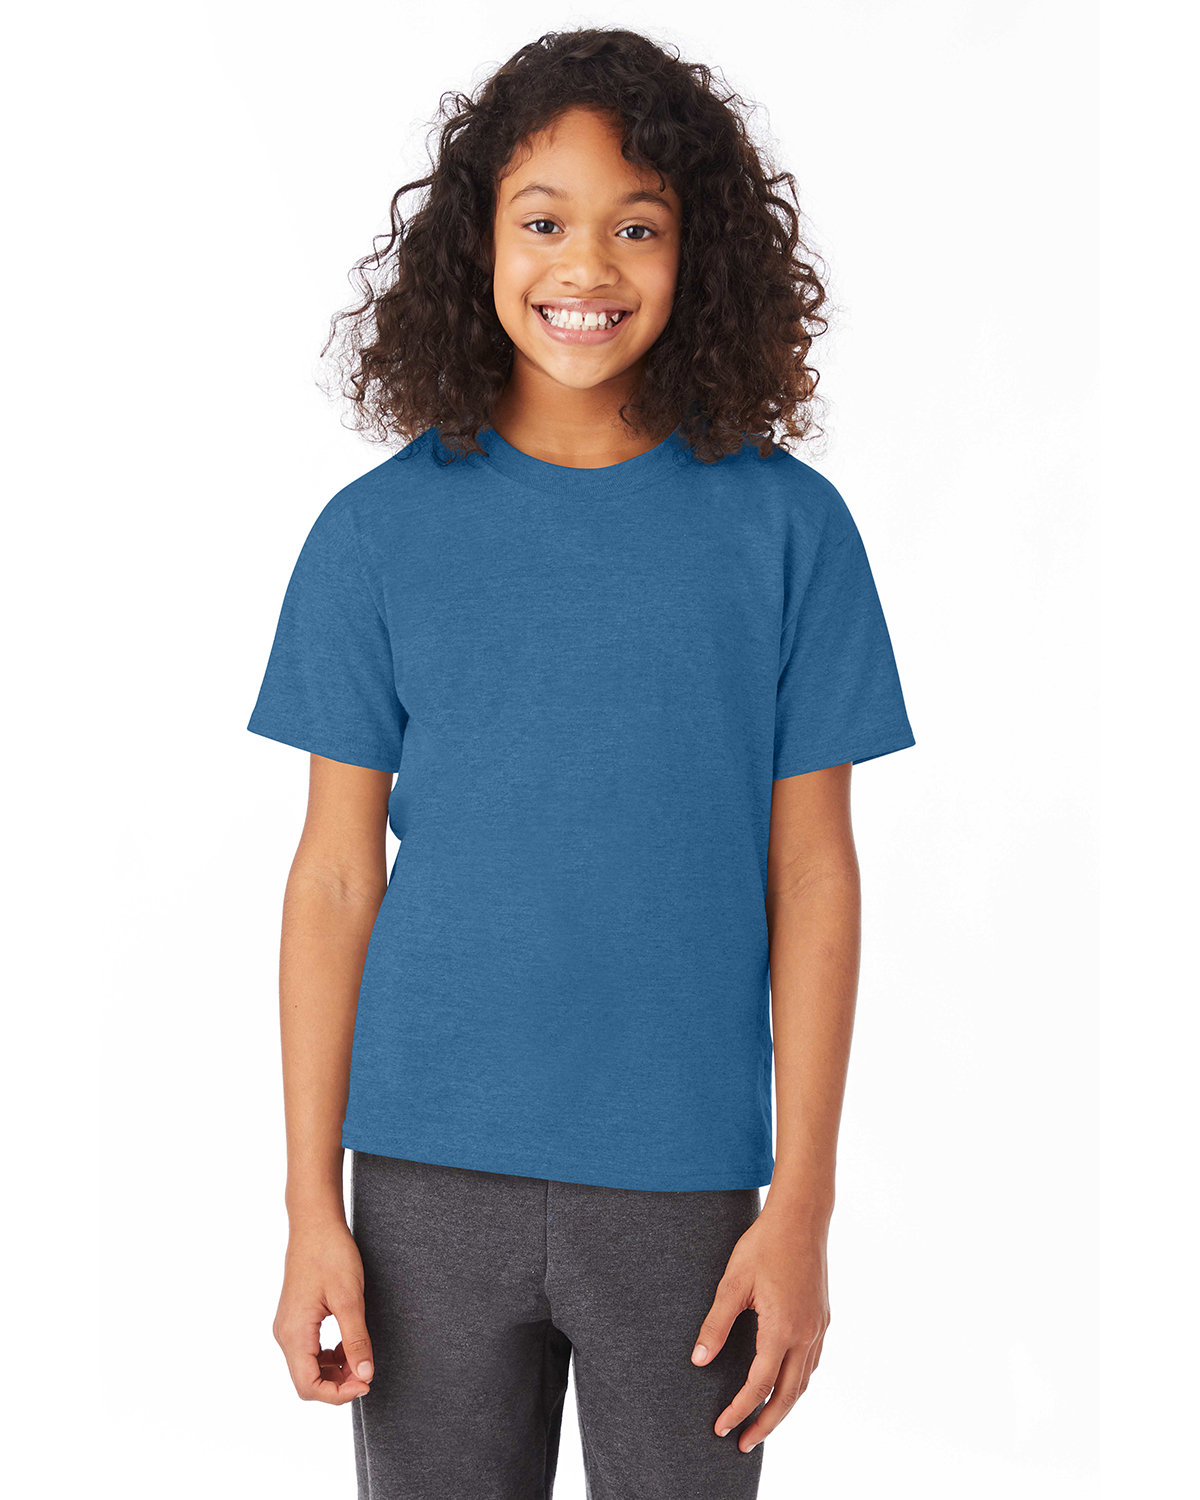 Hanes Youth 50/50 T-Shirt HEATHER BLUE 